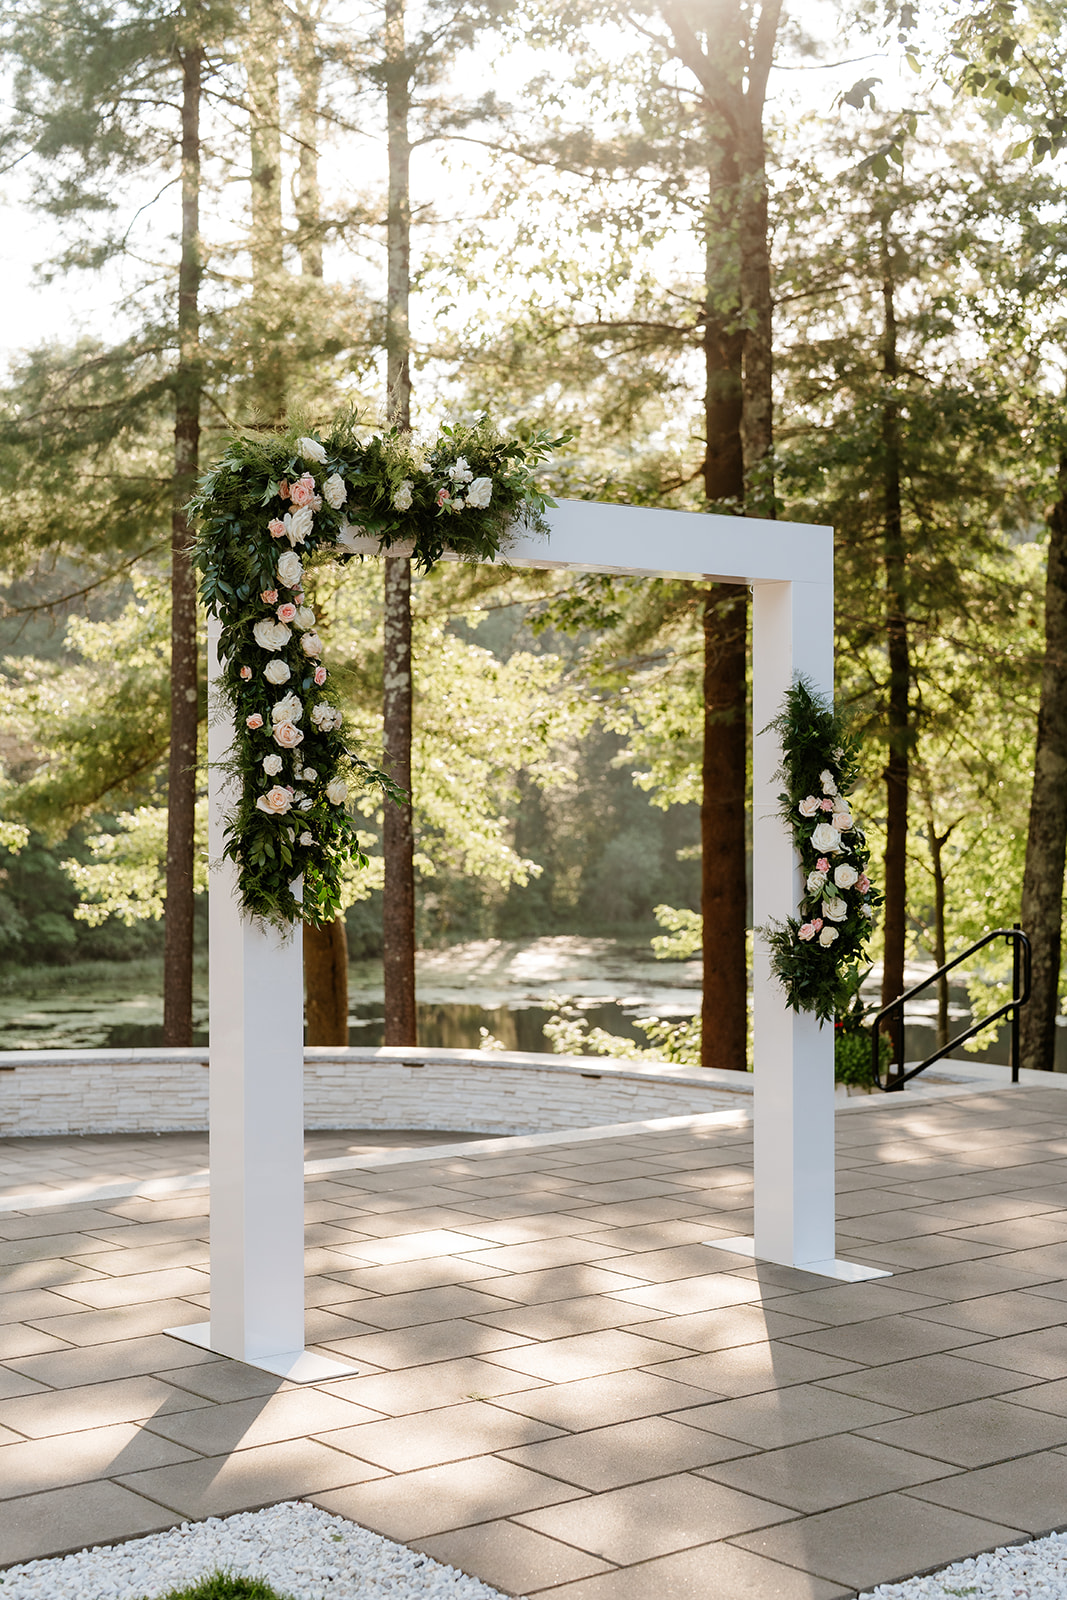 An elegant white ceremonial arch decorated with floral arrangements stands on a paved area surrounded by tall trees bathed in sunlight at Lakeview Pavilion